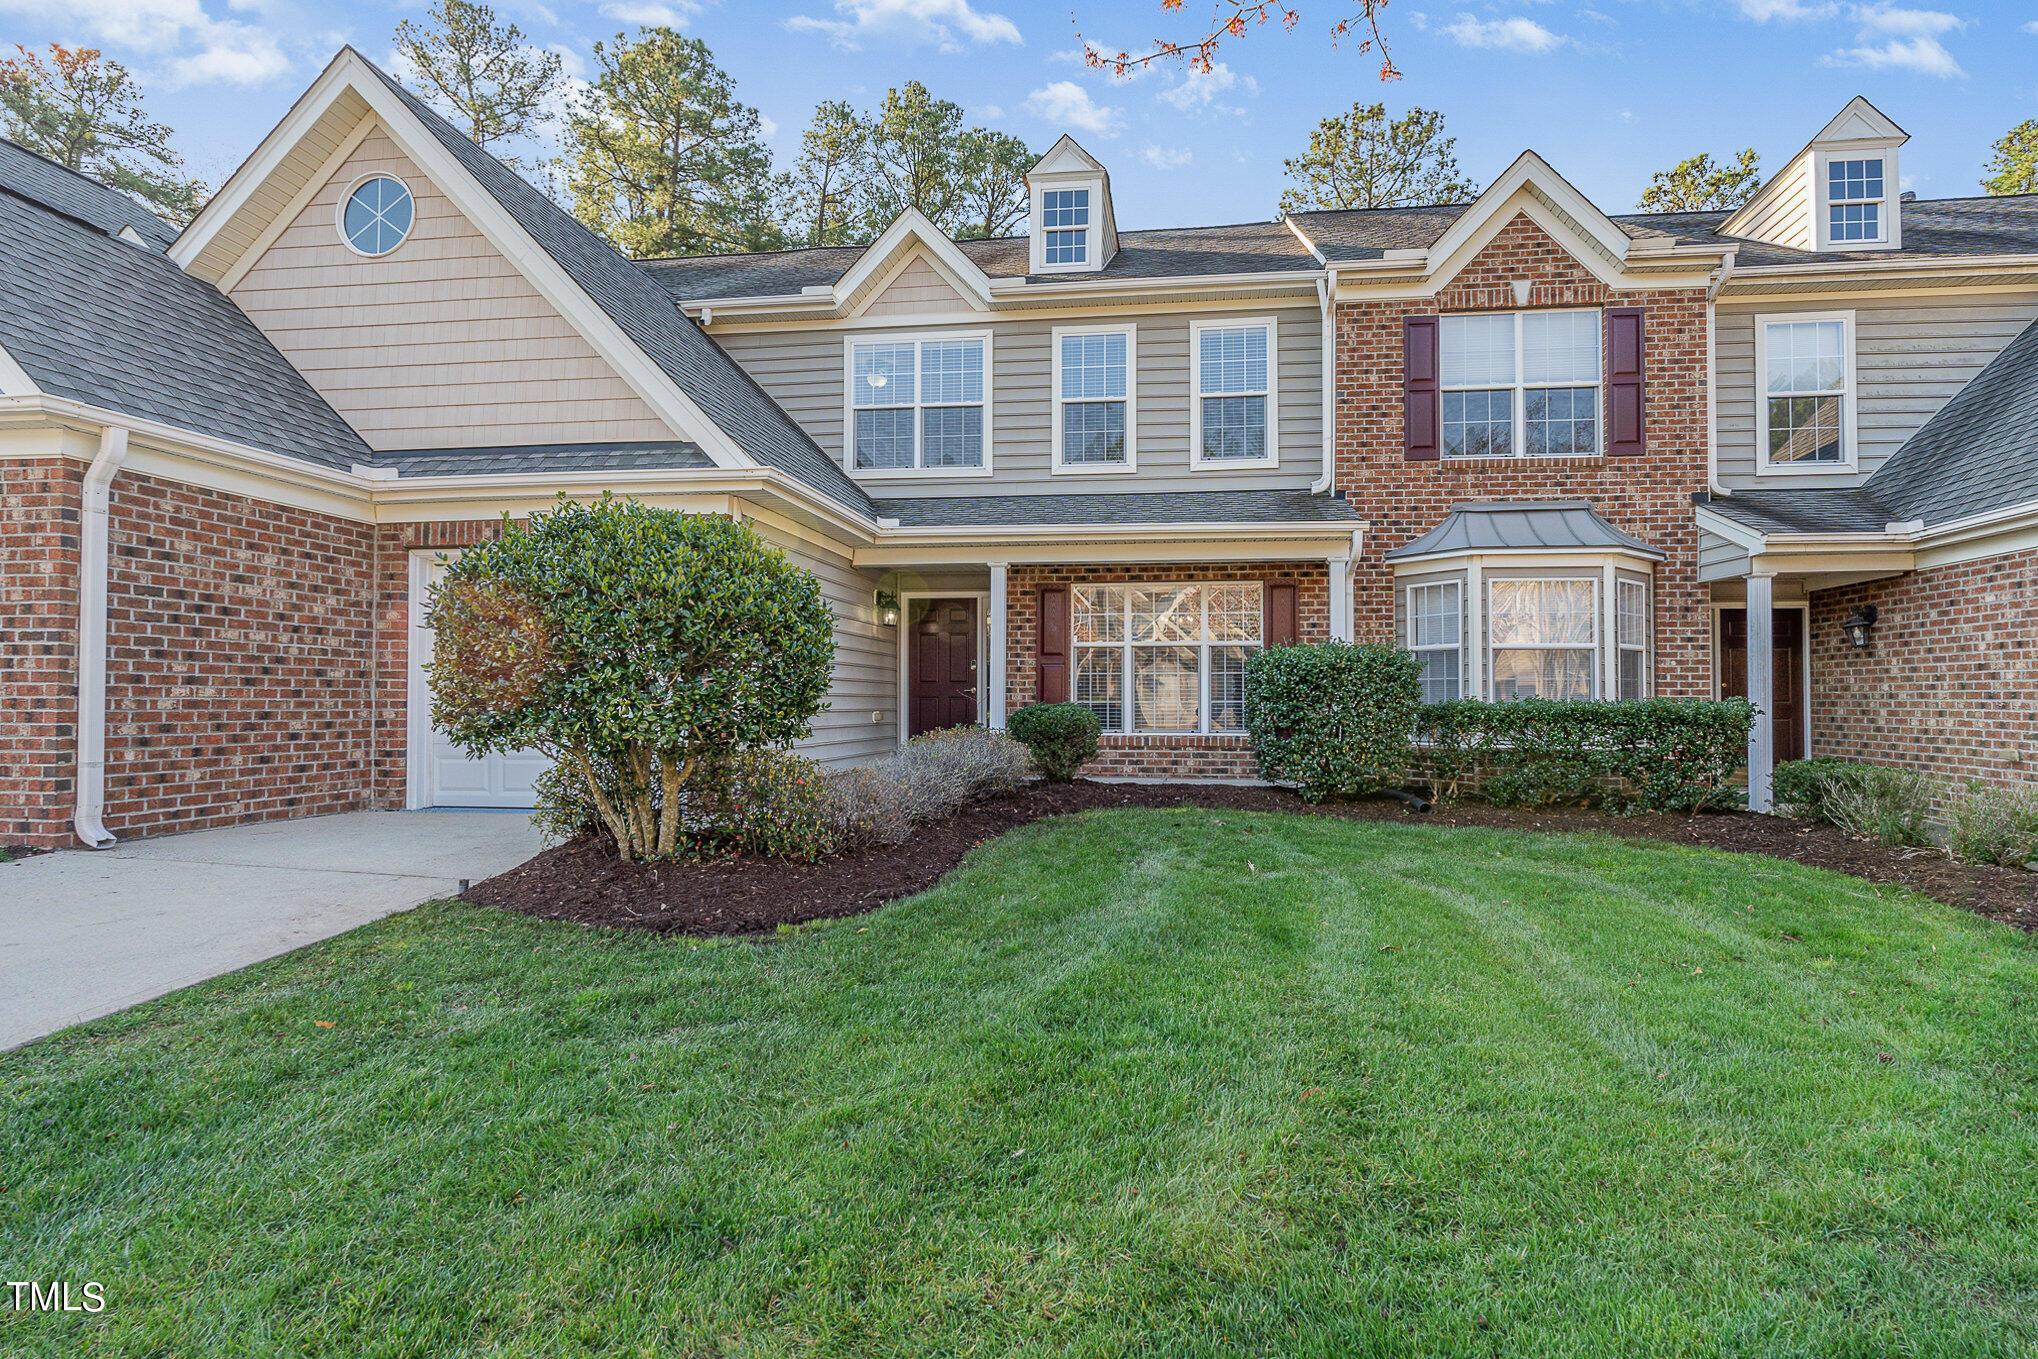 Photo one of 11235 Maplecroft Ct Raleigh NC 27617 | MLS 10017432